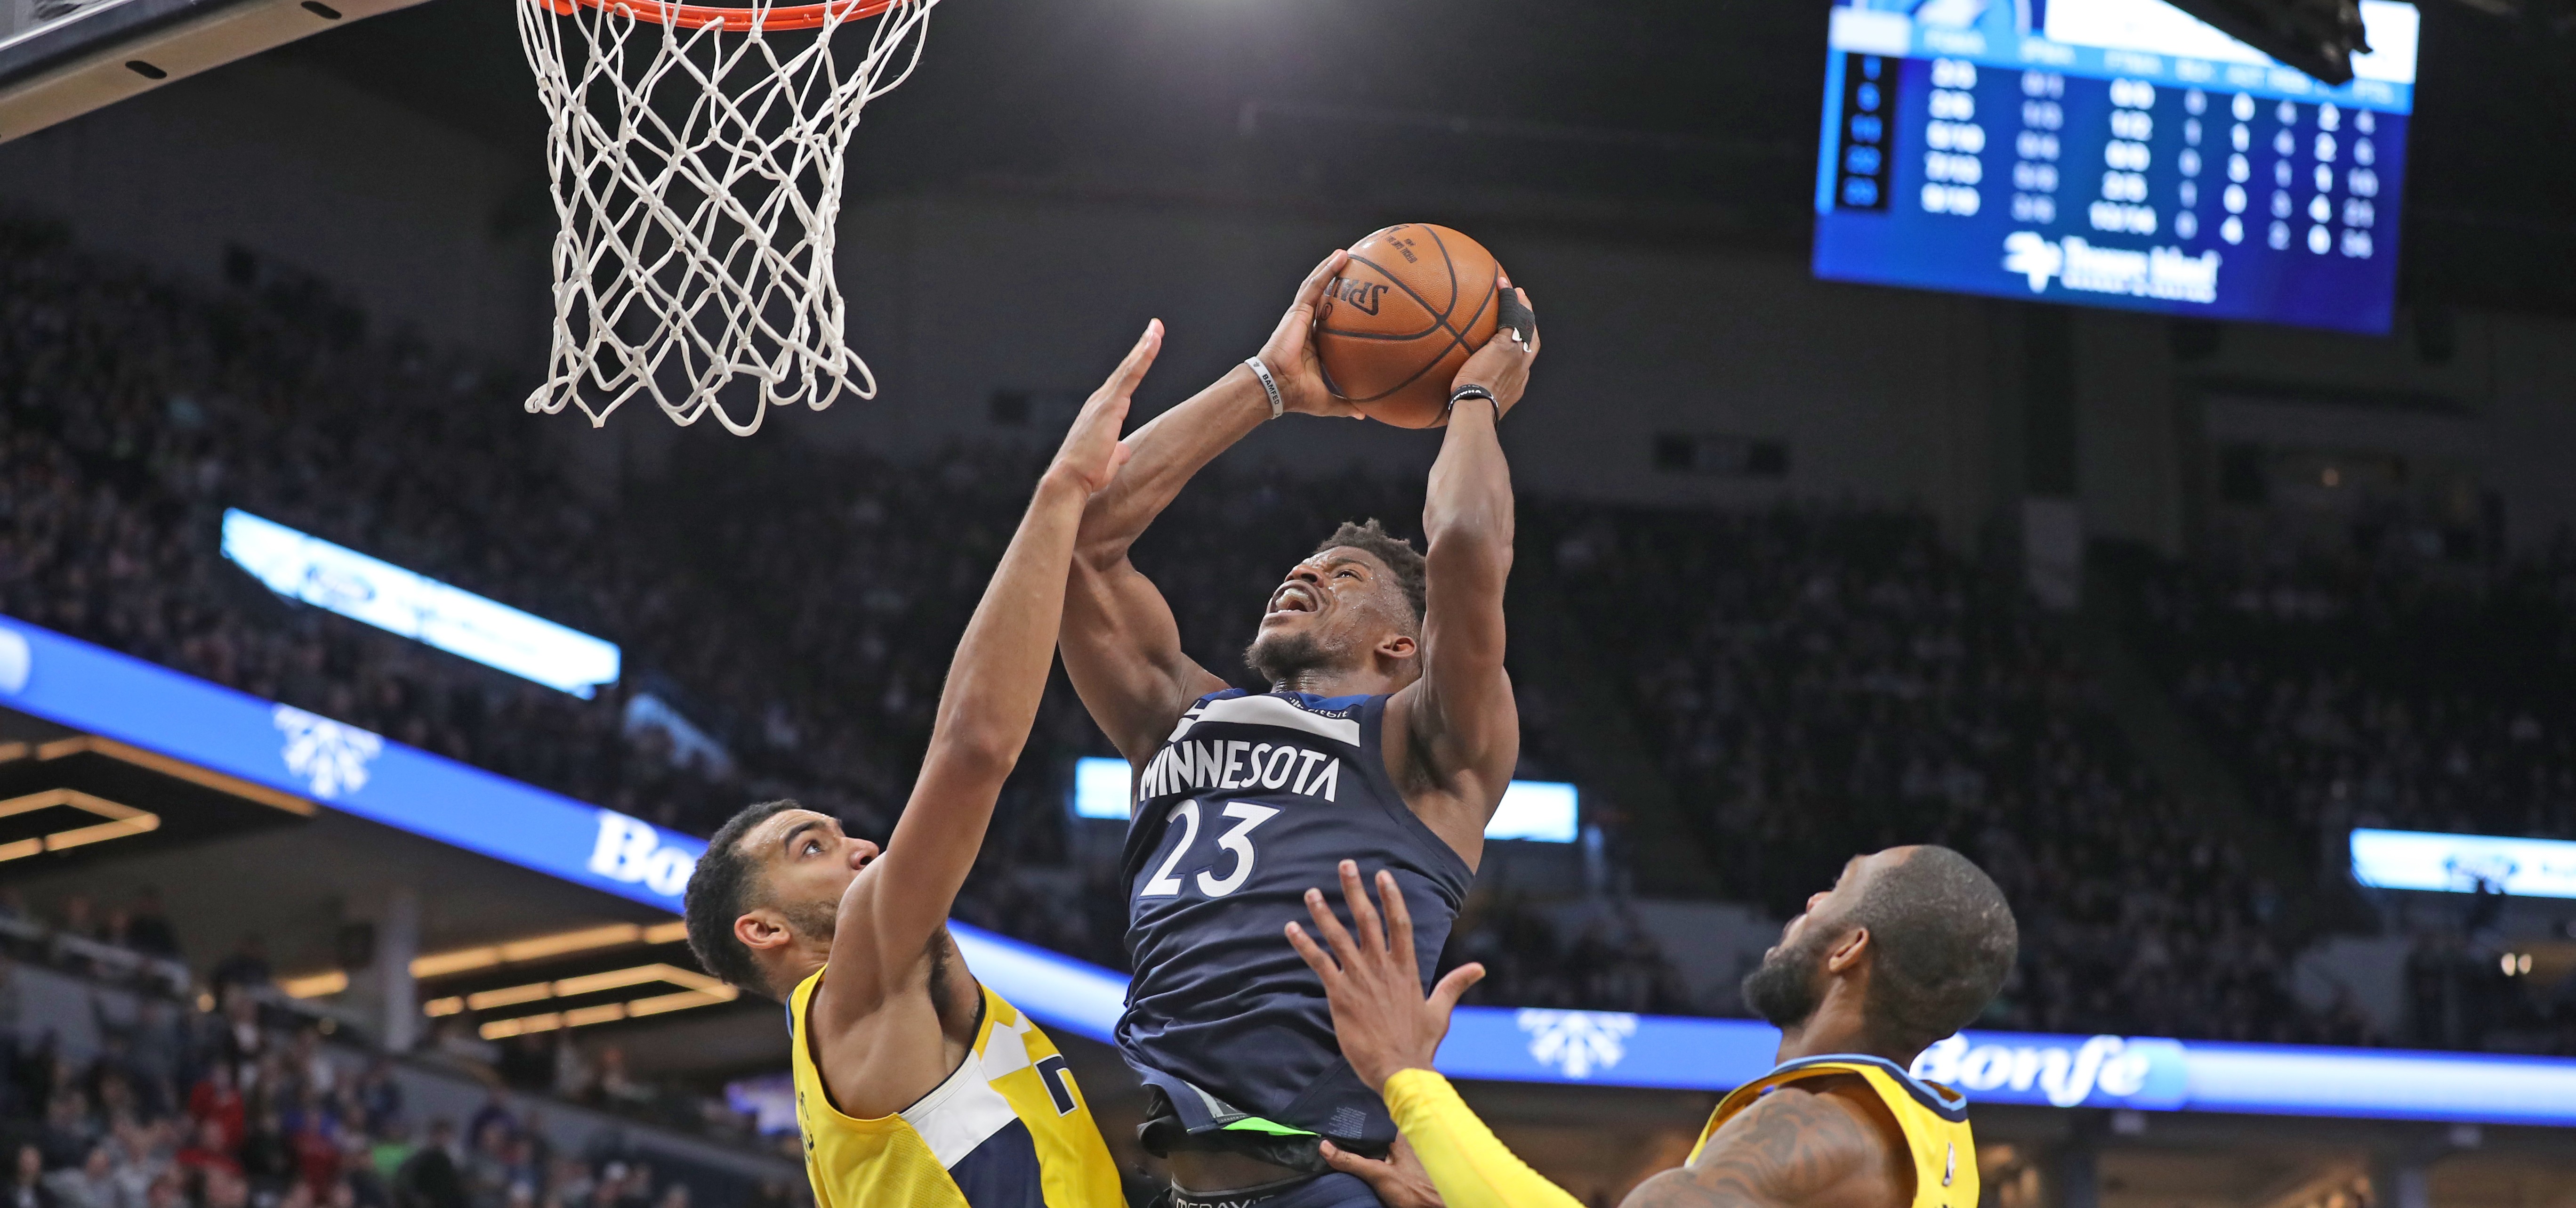 Scouting Report Wolves vs. Nuggets